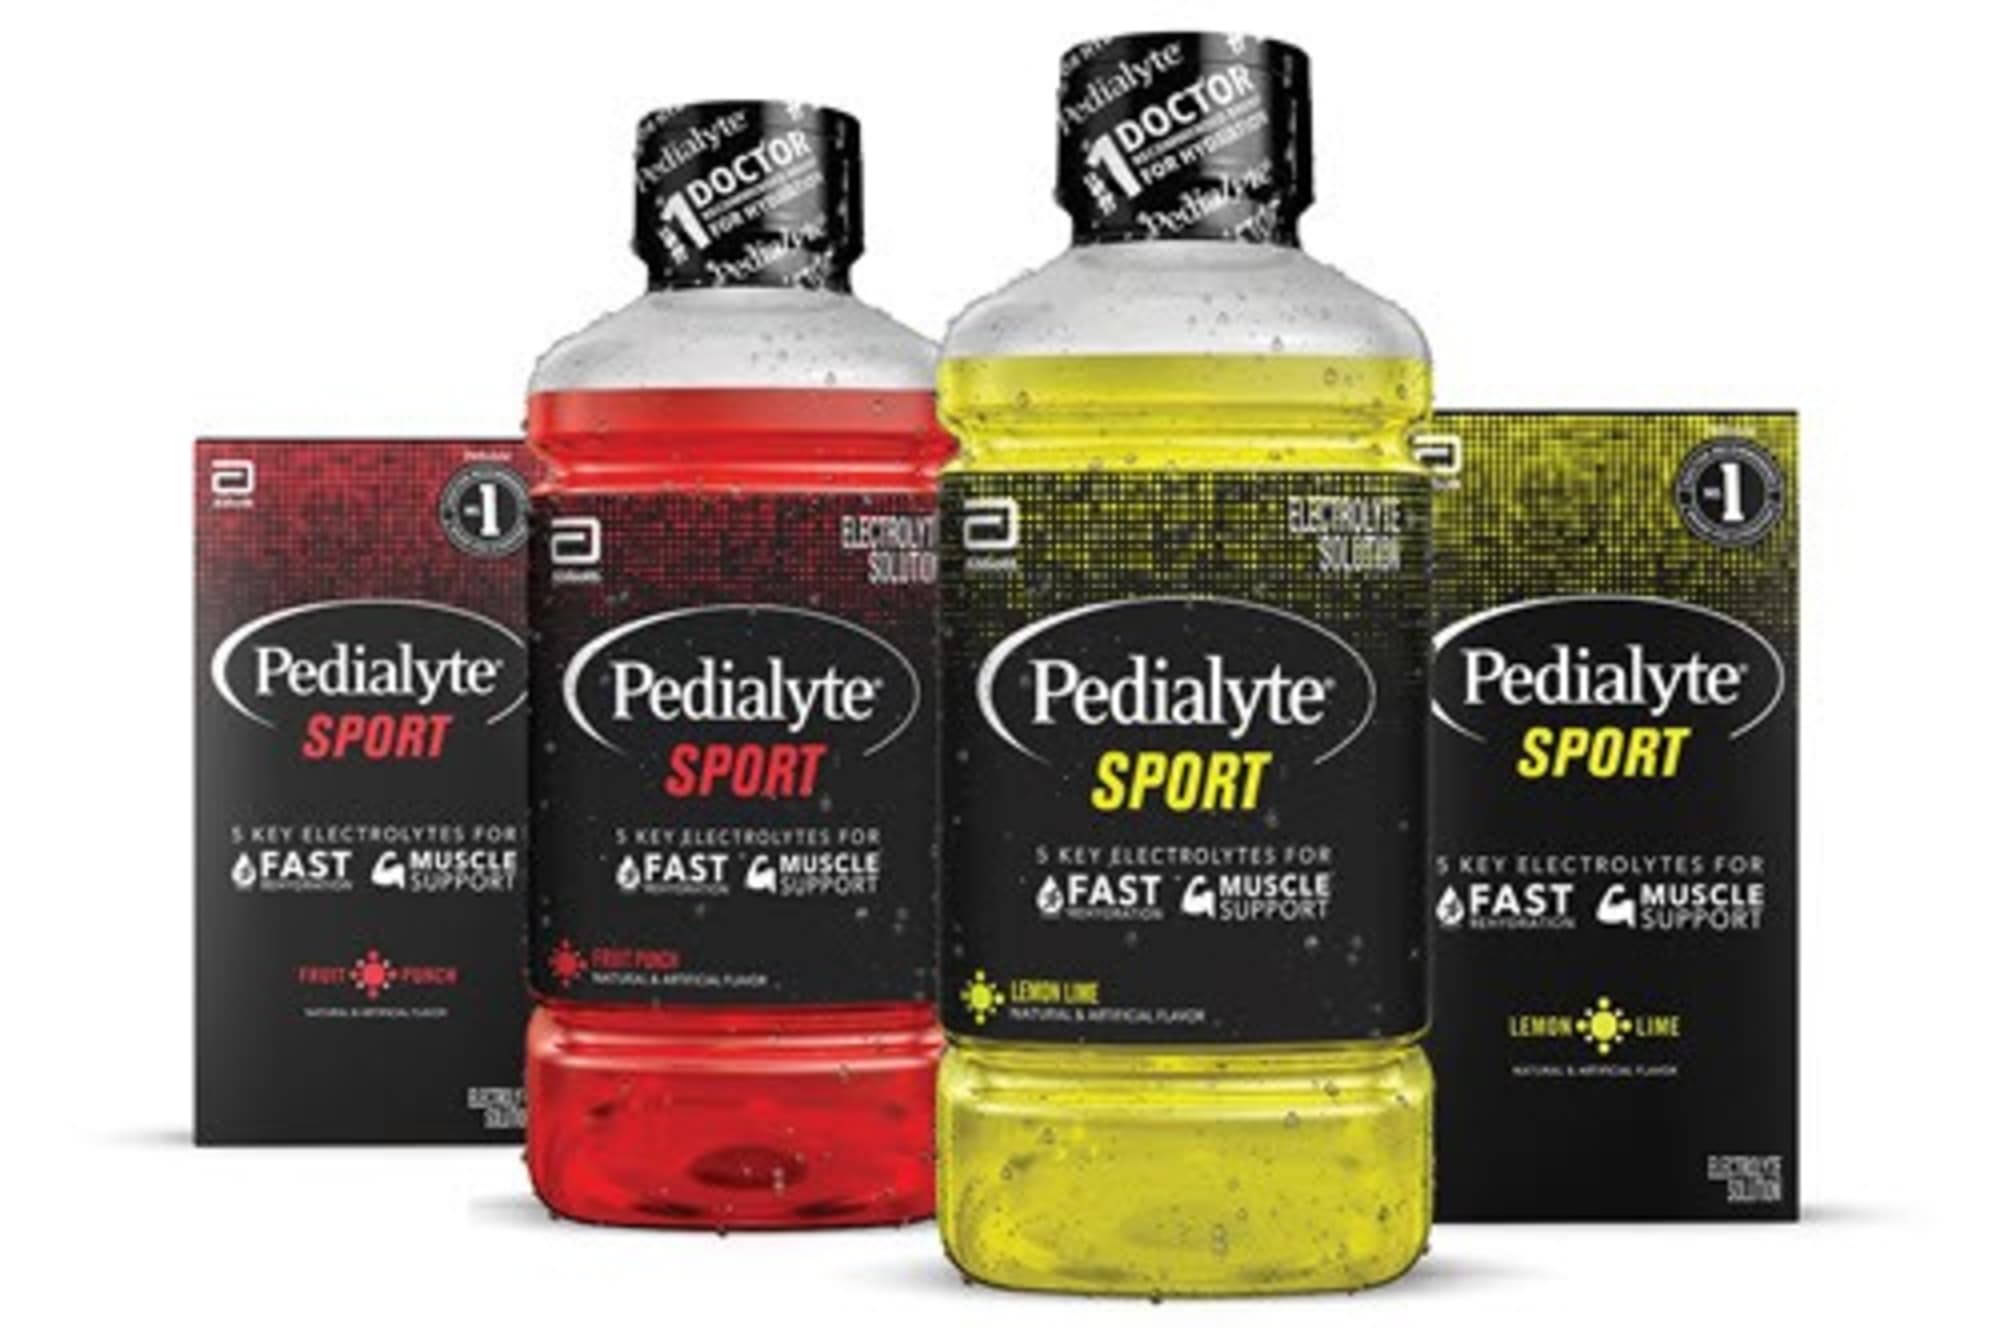 Pedialyte Sport is designed specifically for sport hydration